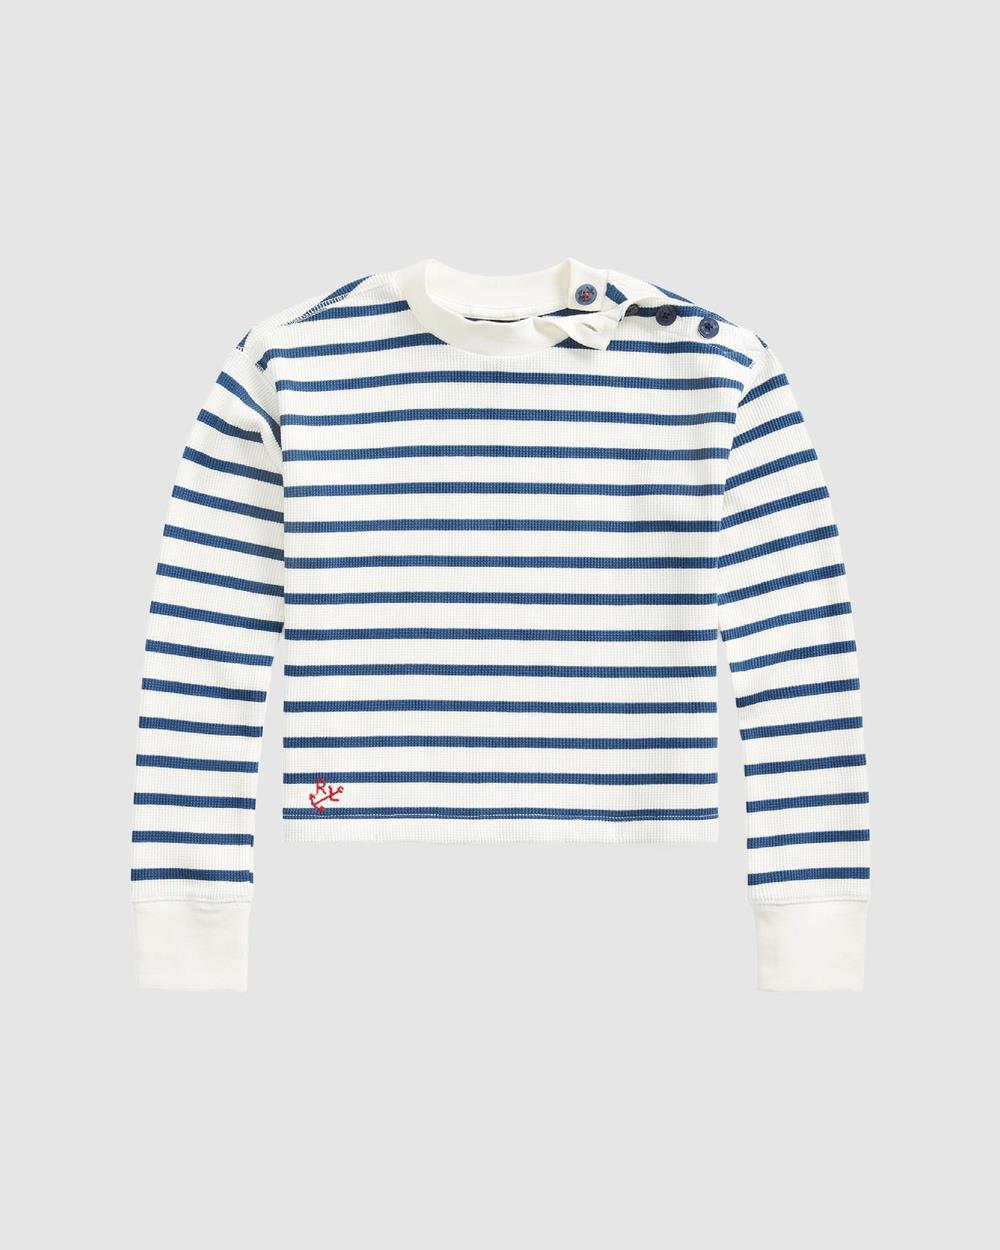 Polo Ralph Lauren - Striped Waffle Knit Boxy Tee ICONIC EXCLUSIVE Teens - Jumpers (Deckwash White Multi) Striped Waffle-Knit Boxy Tee - ICONIC EXCLUSIVE - Teens